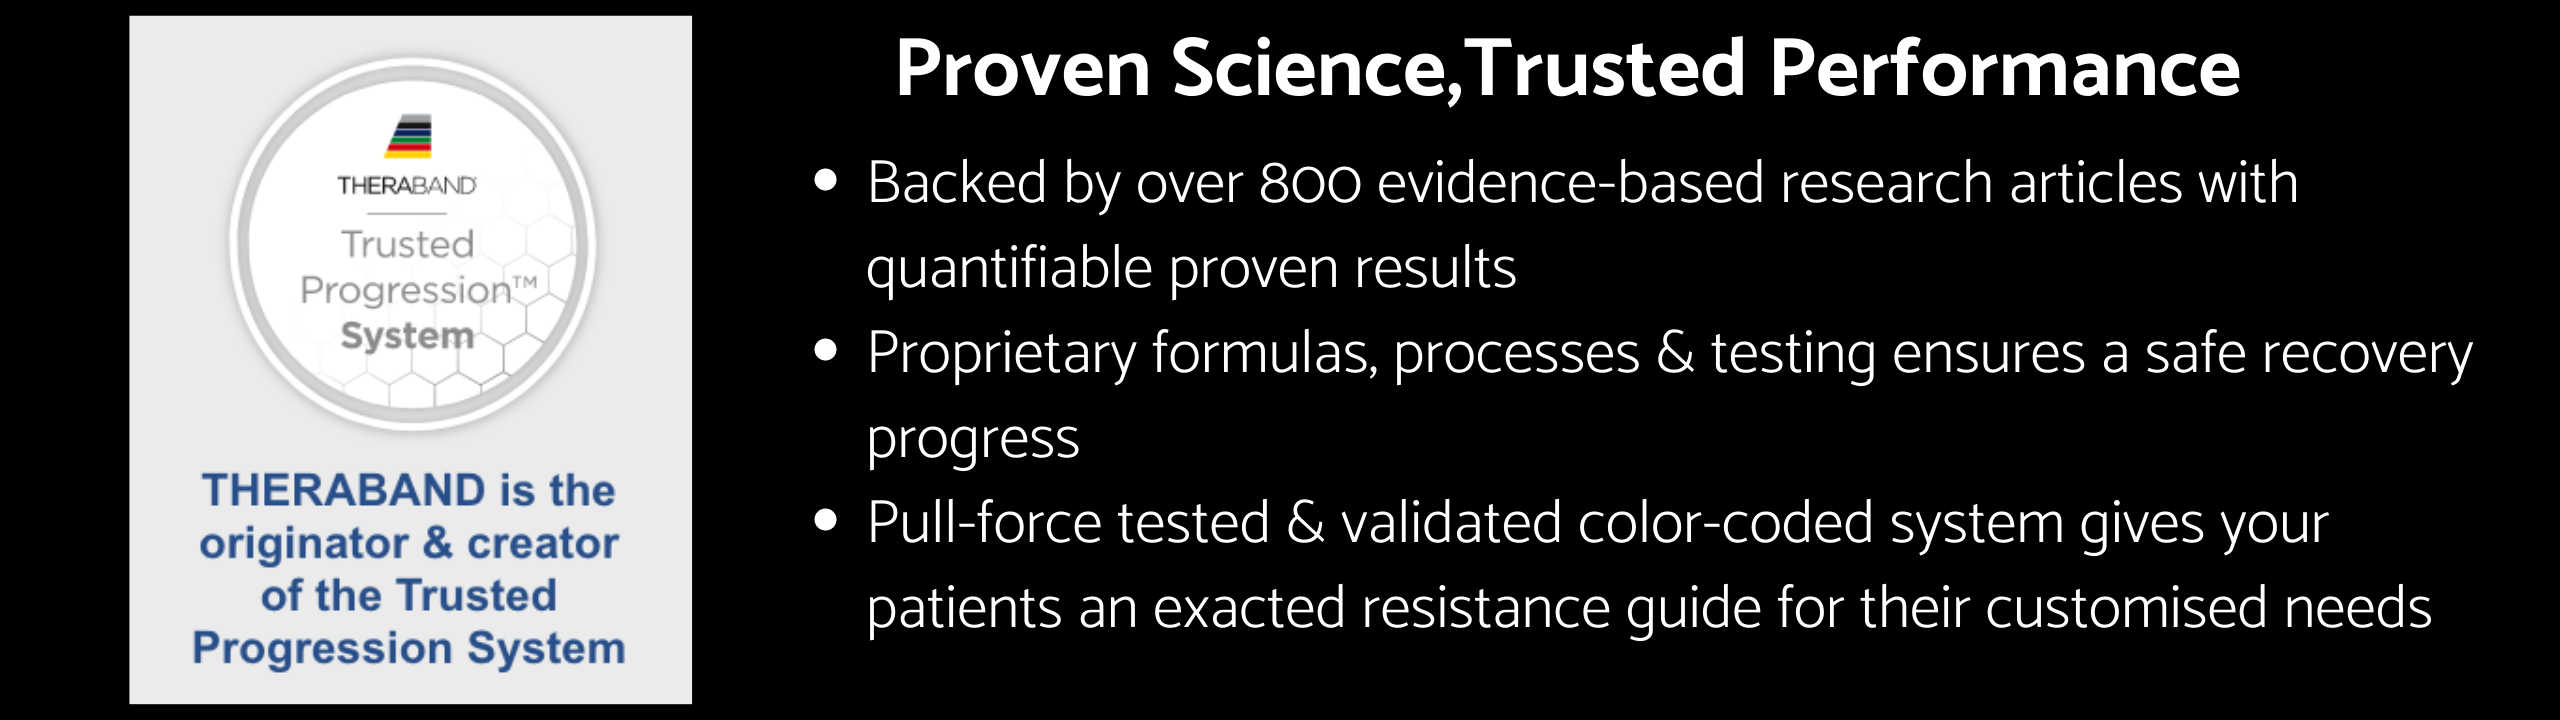 Proven Science,Trusted Performance